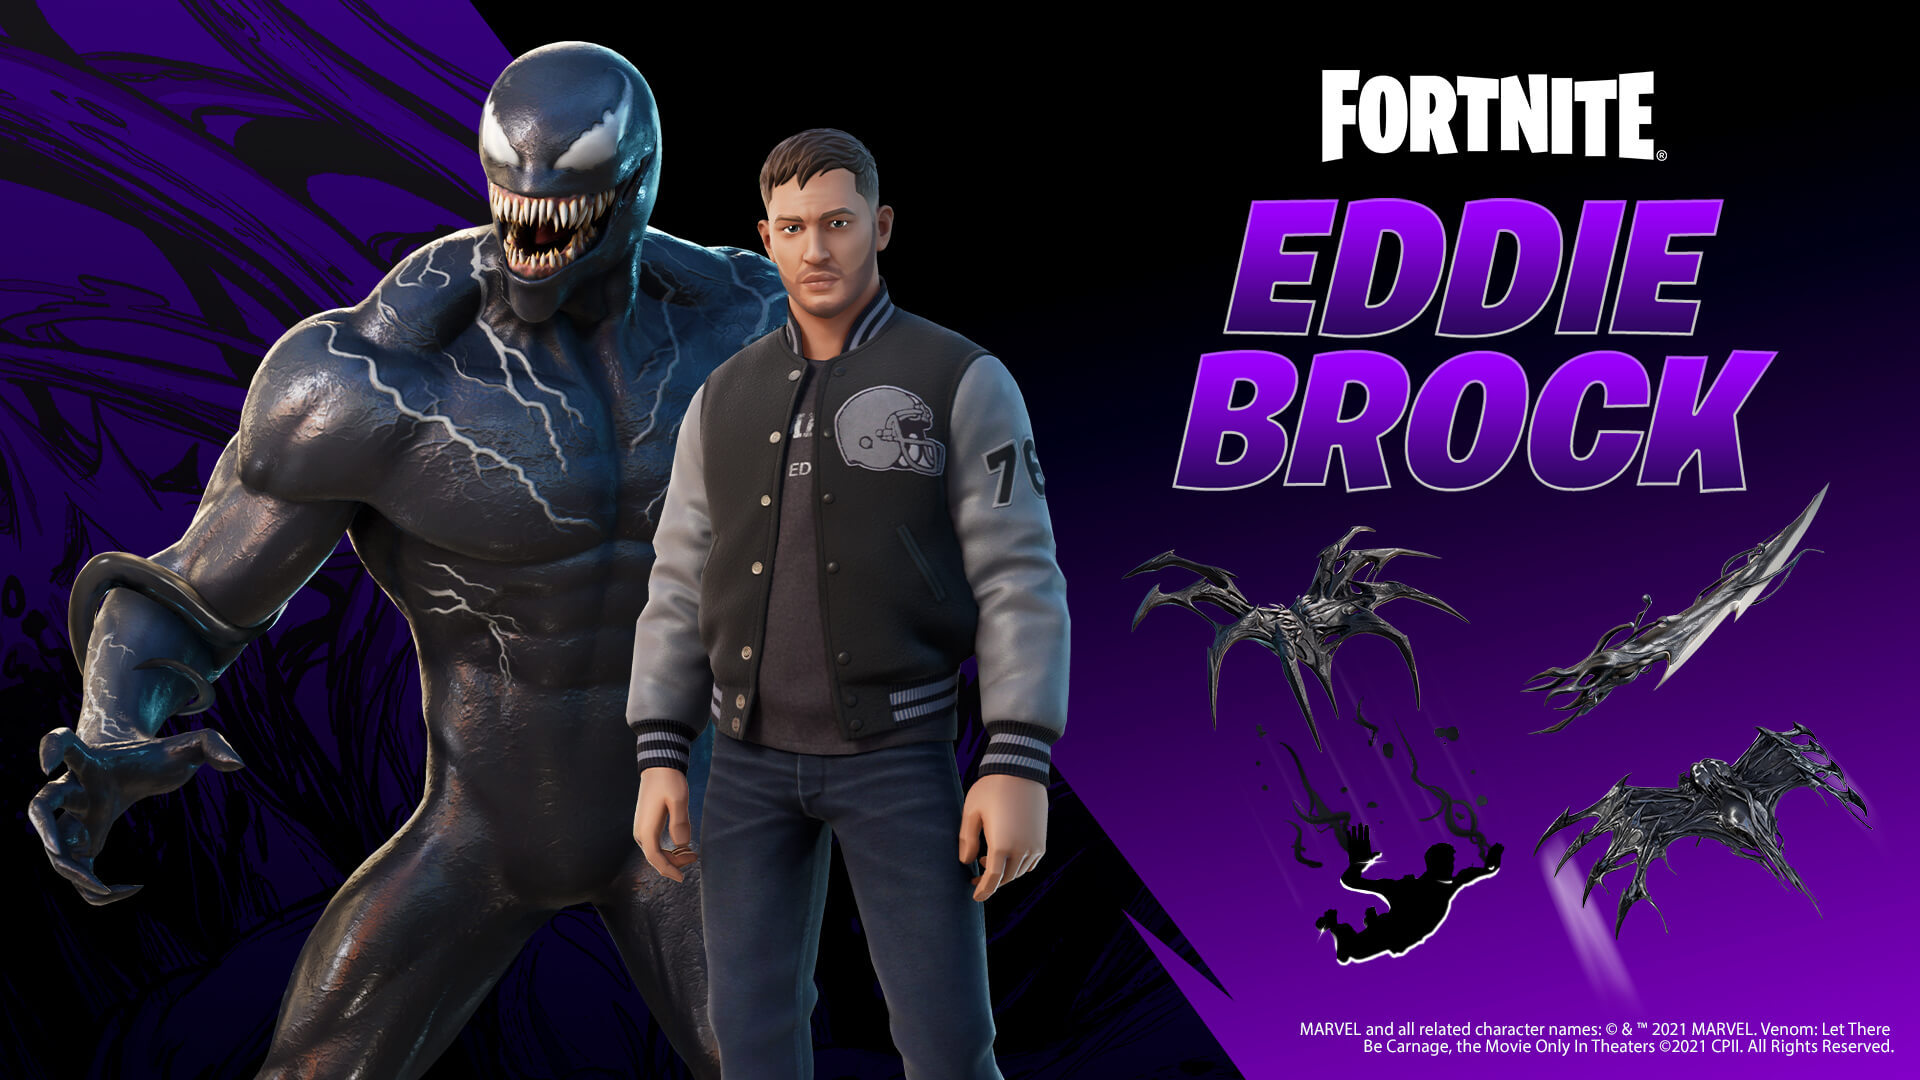 Unleash Venom in Fortnite with the Eddie Brock Outfit!